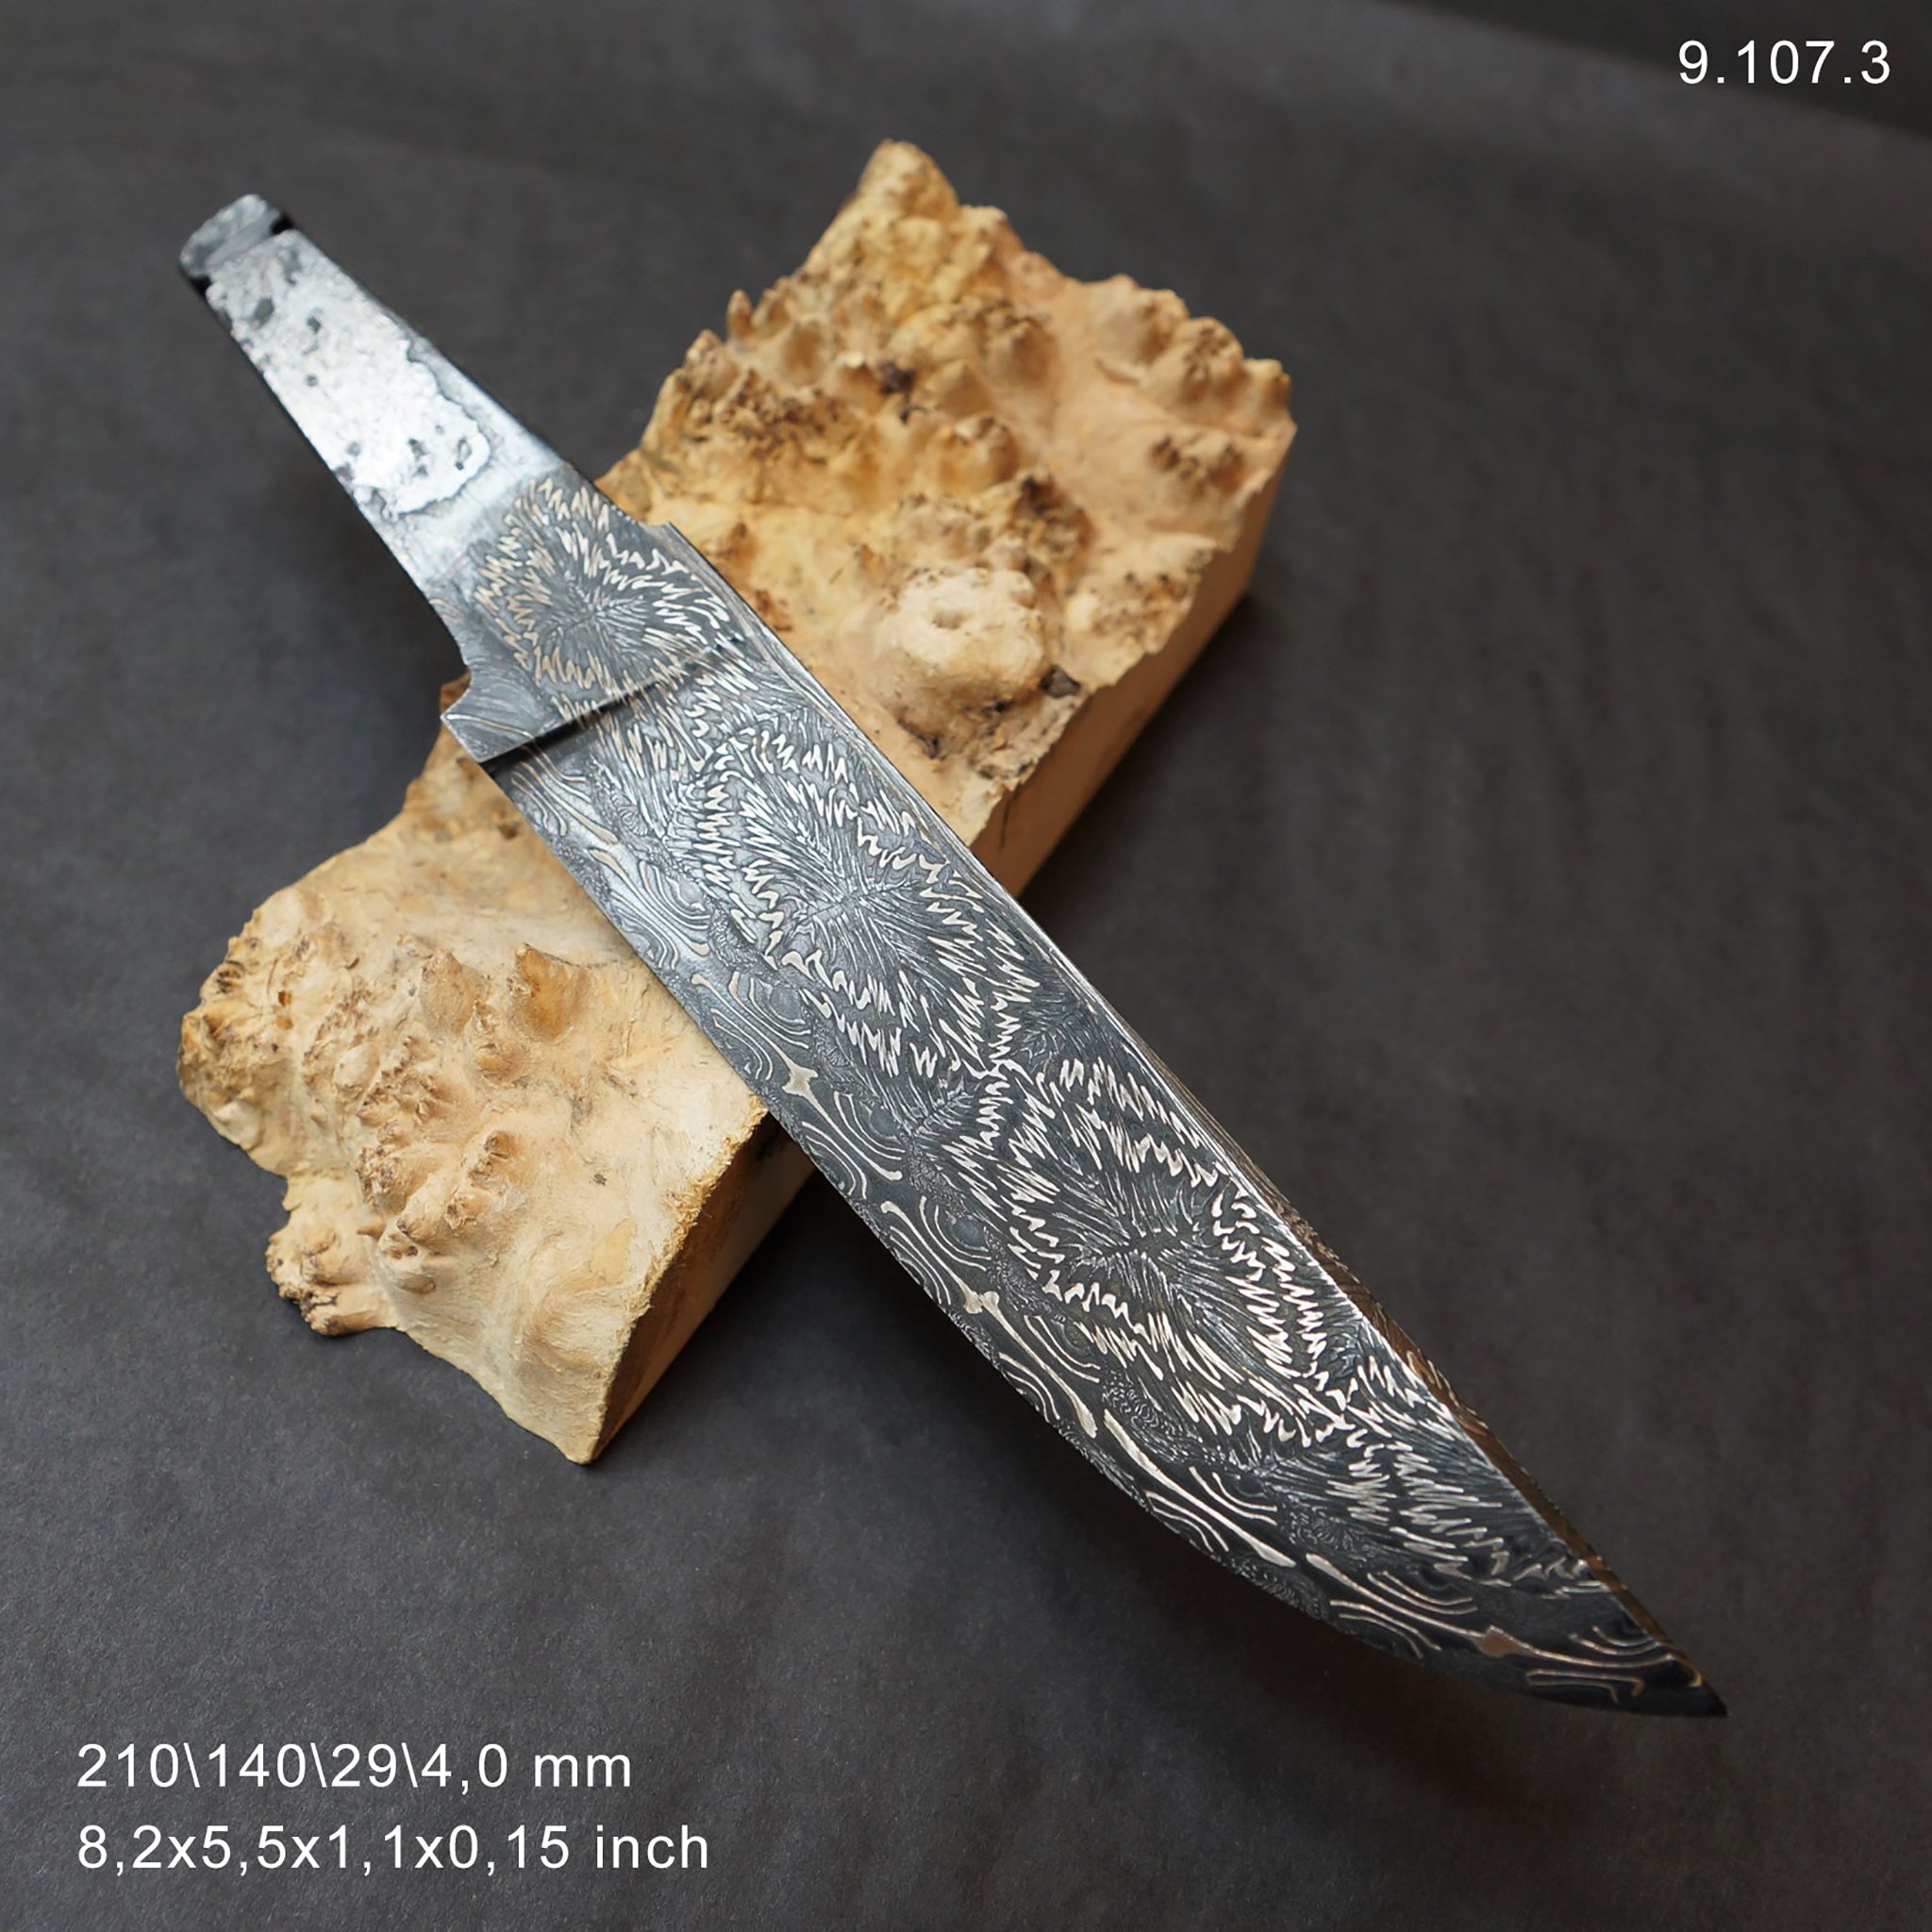 9 Inches Handmade Damascus Steel Back Lock Pocket Knife With